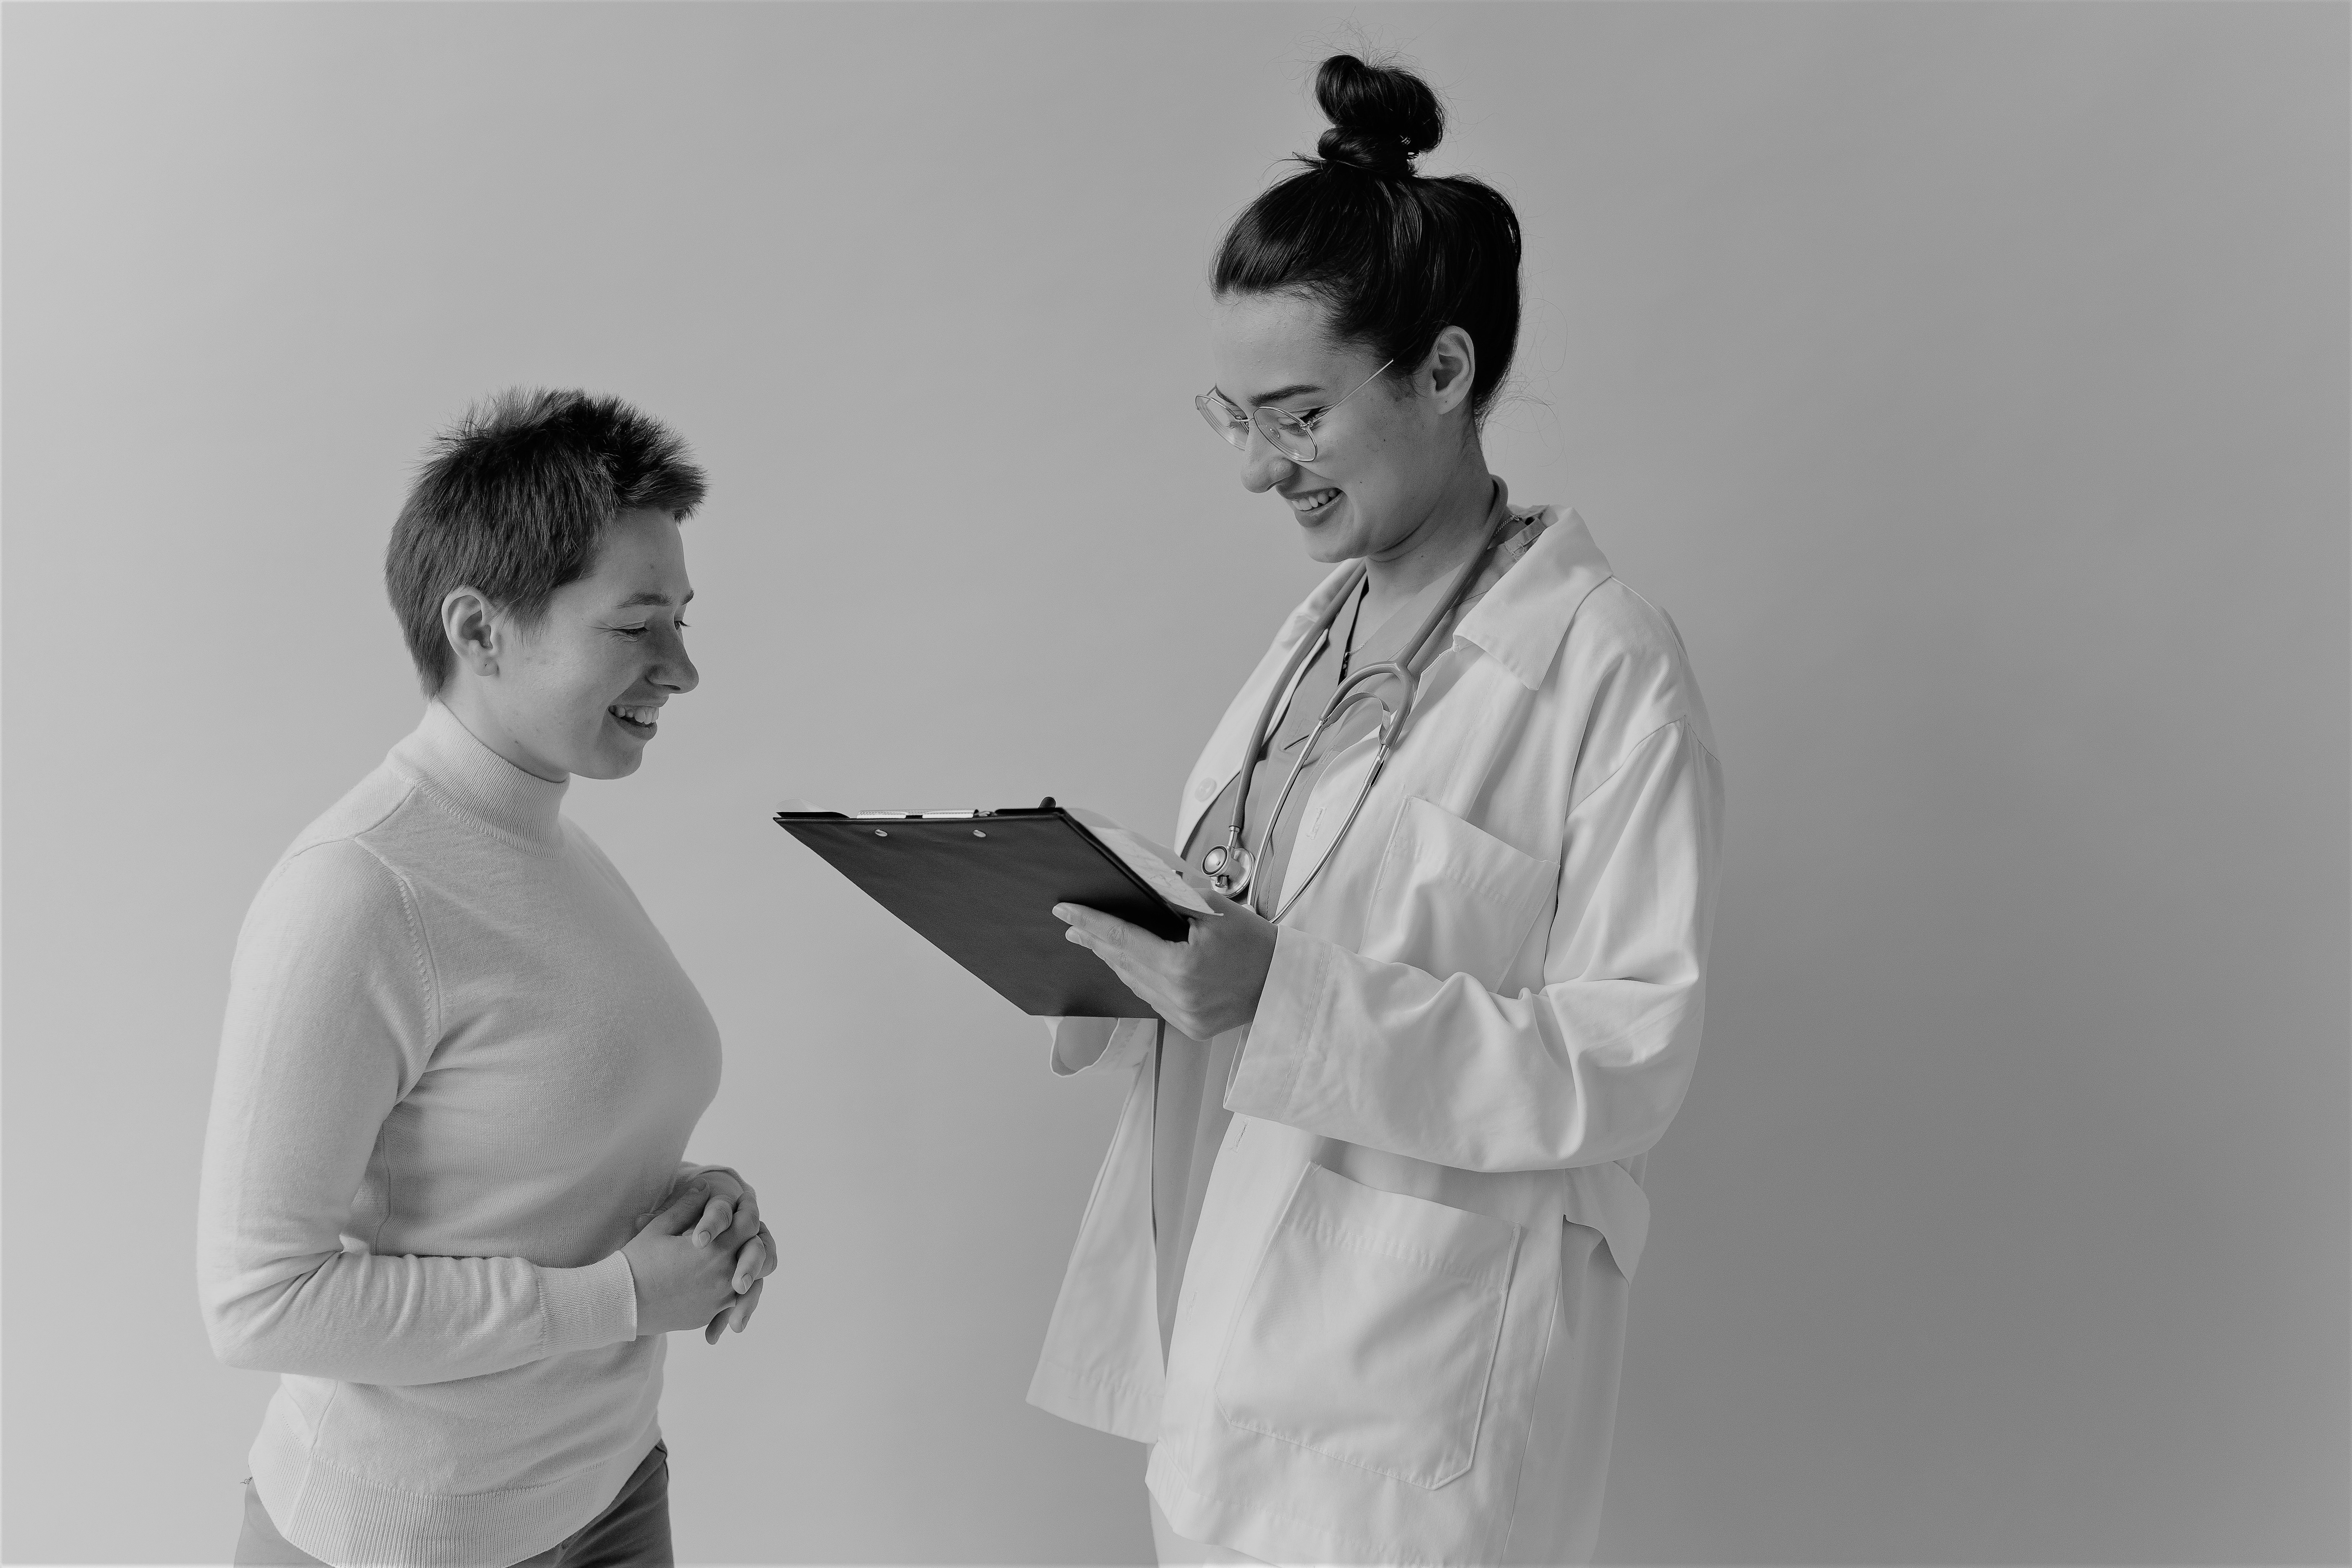 Doctor with hair up and a clipboard is smiling at a person standing in front of them